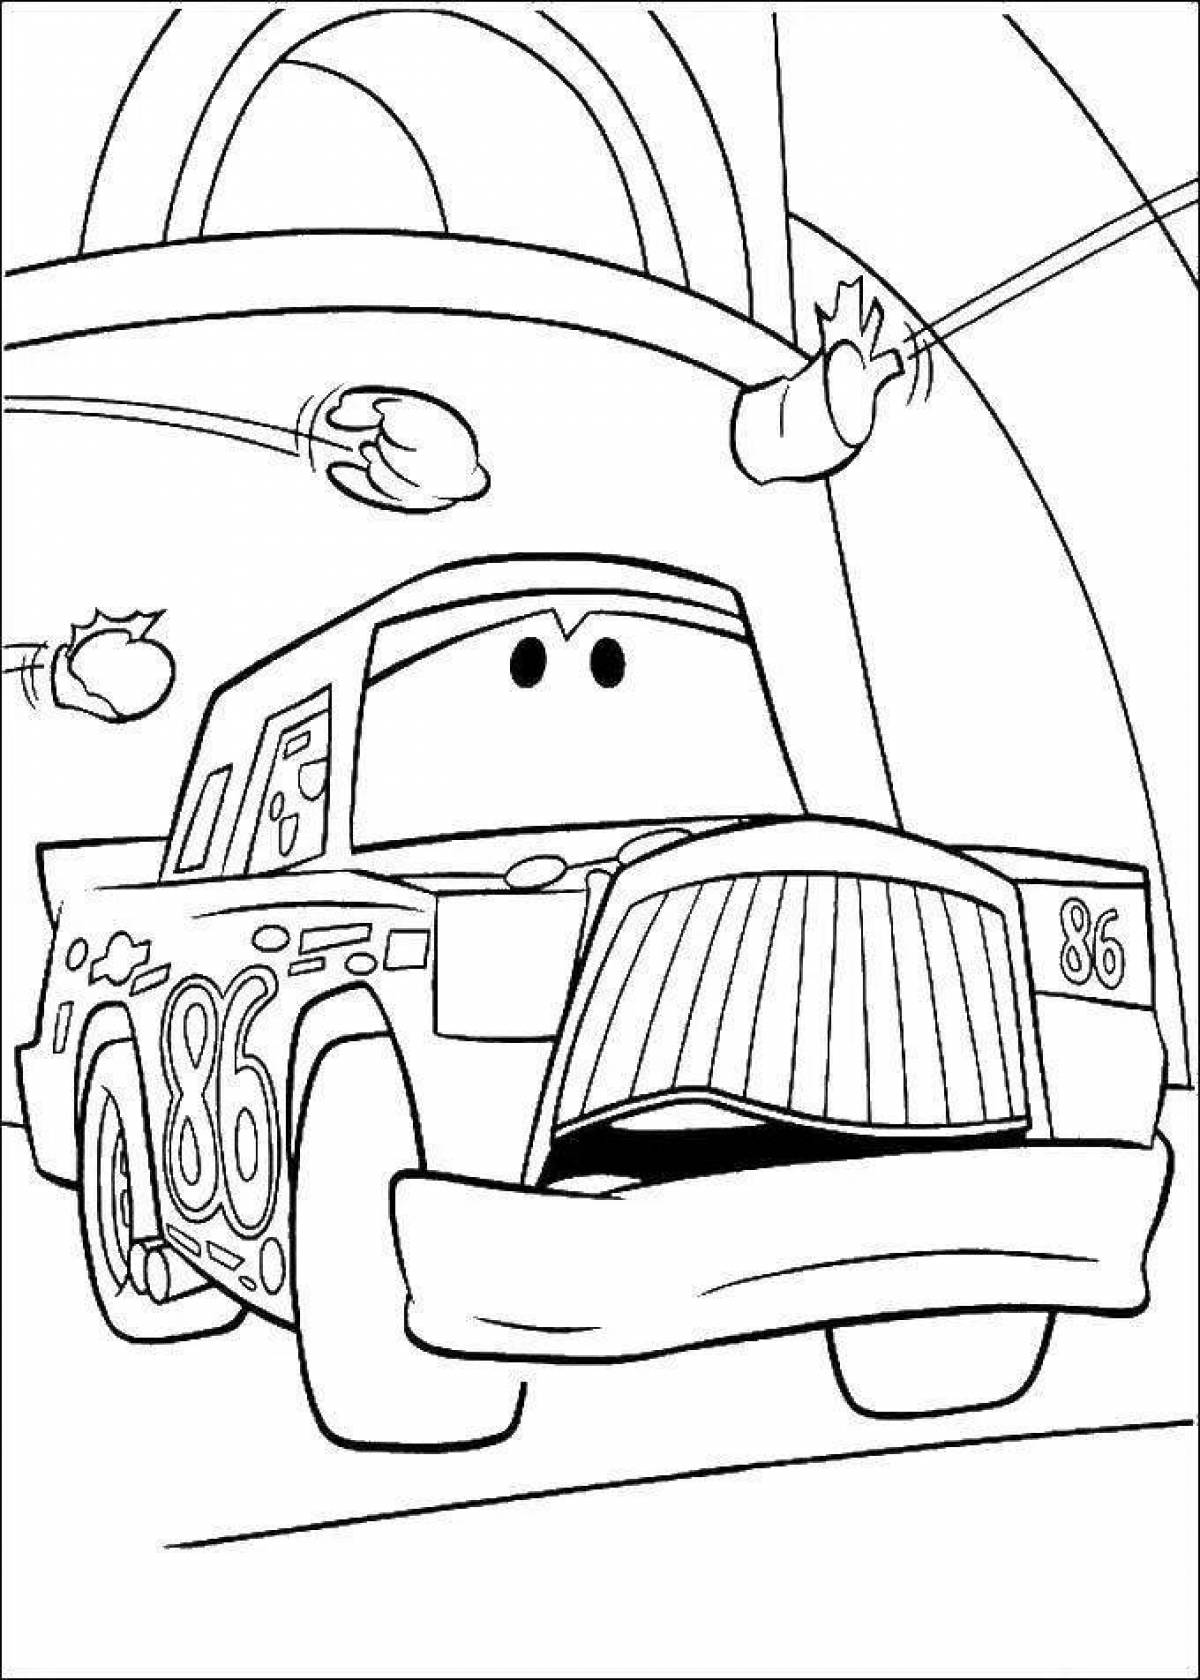 Coloring page playful chico hicks